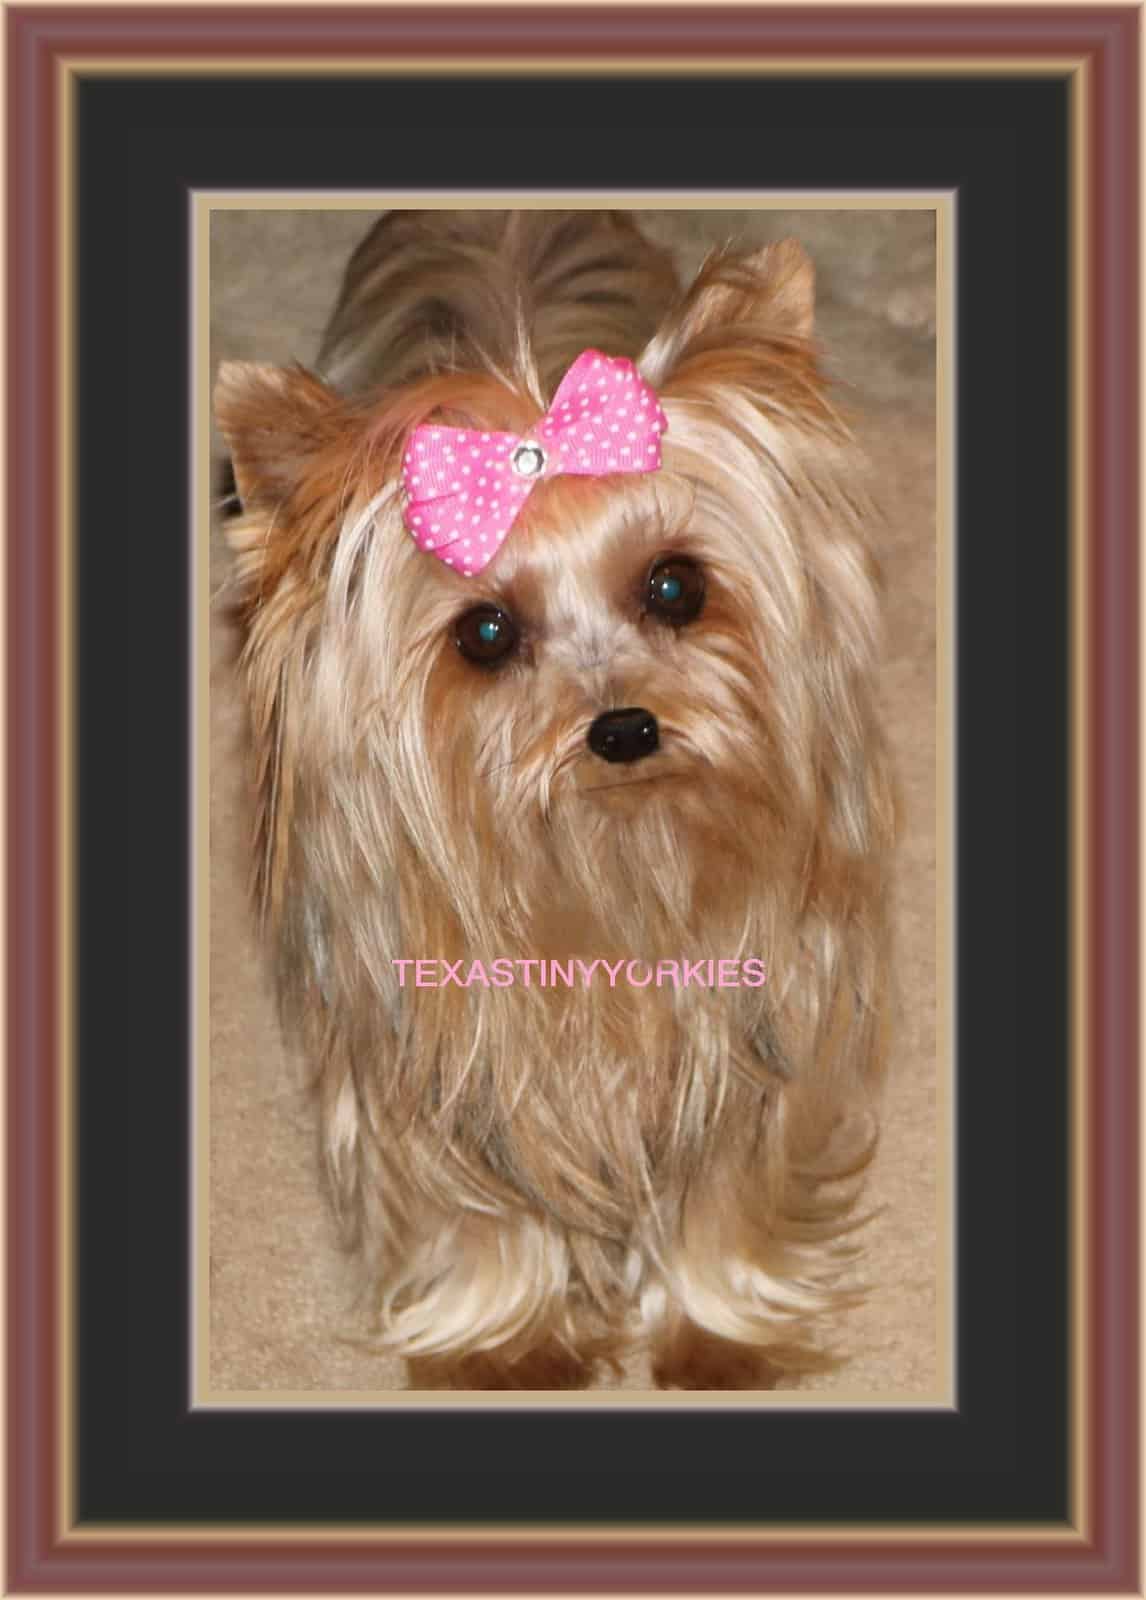 A yorkie with a pink bow on her head from reputable breeders.